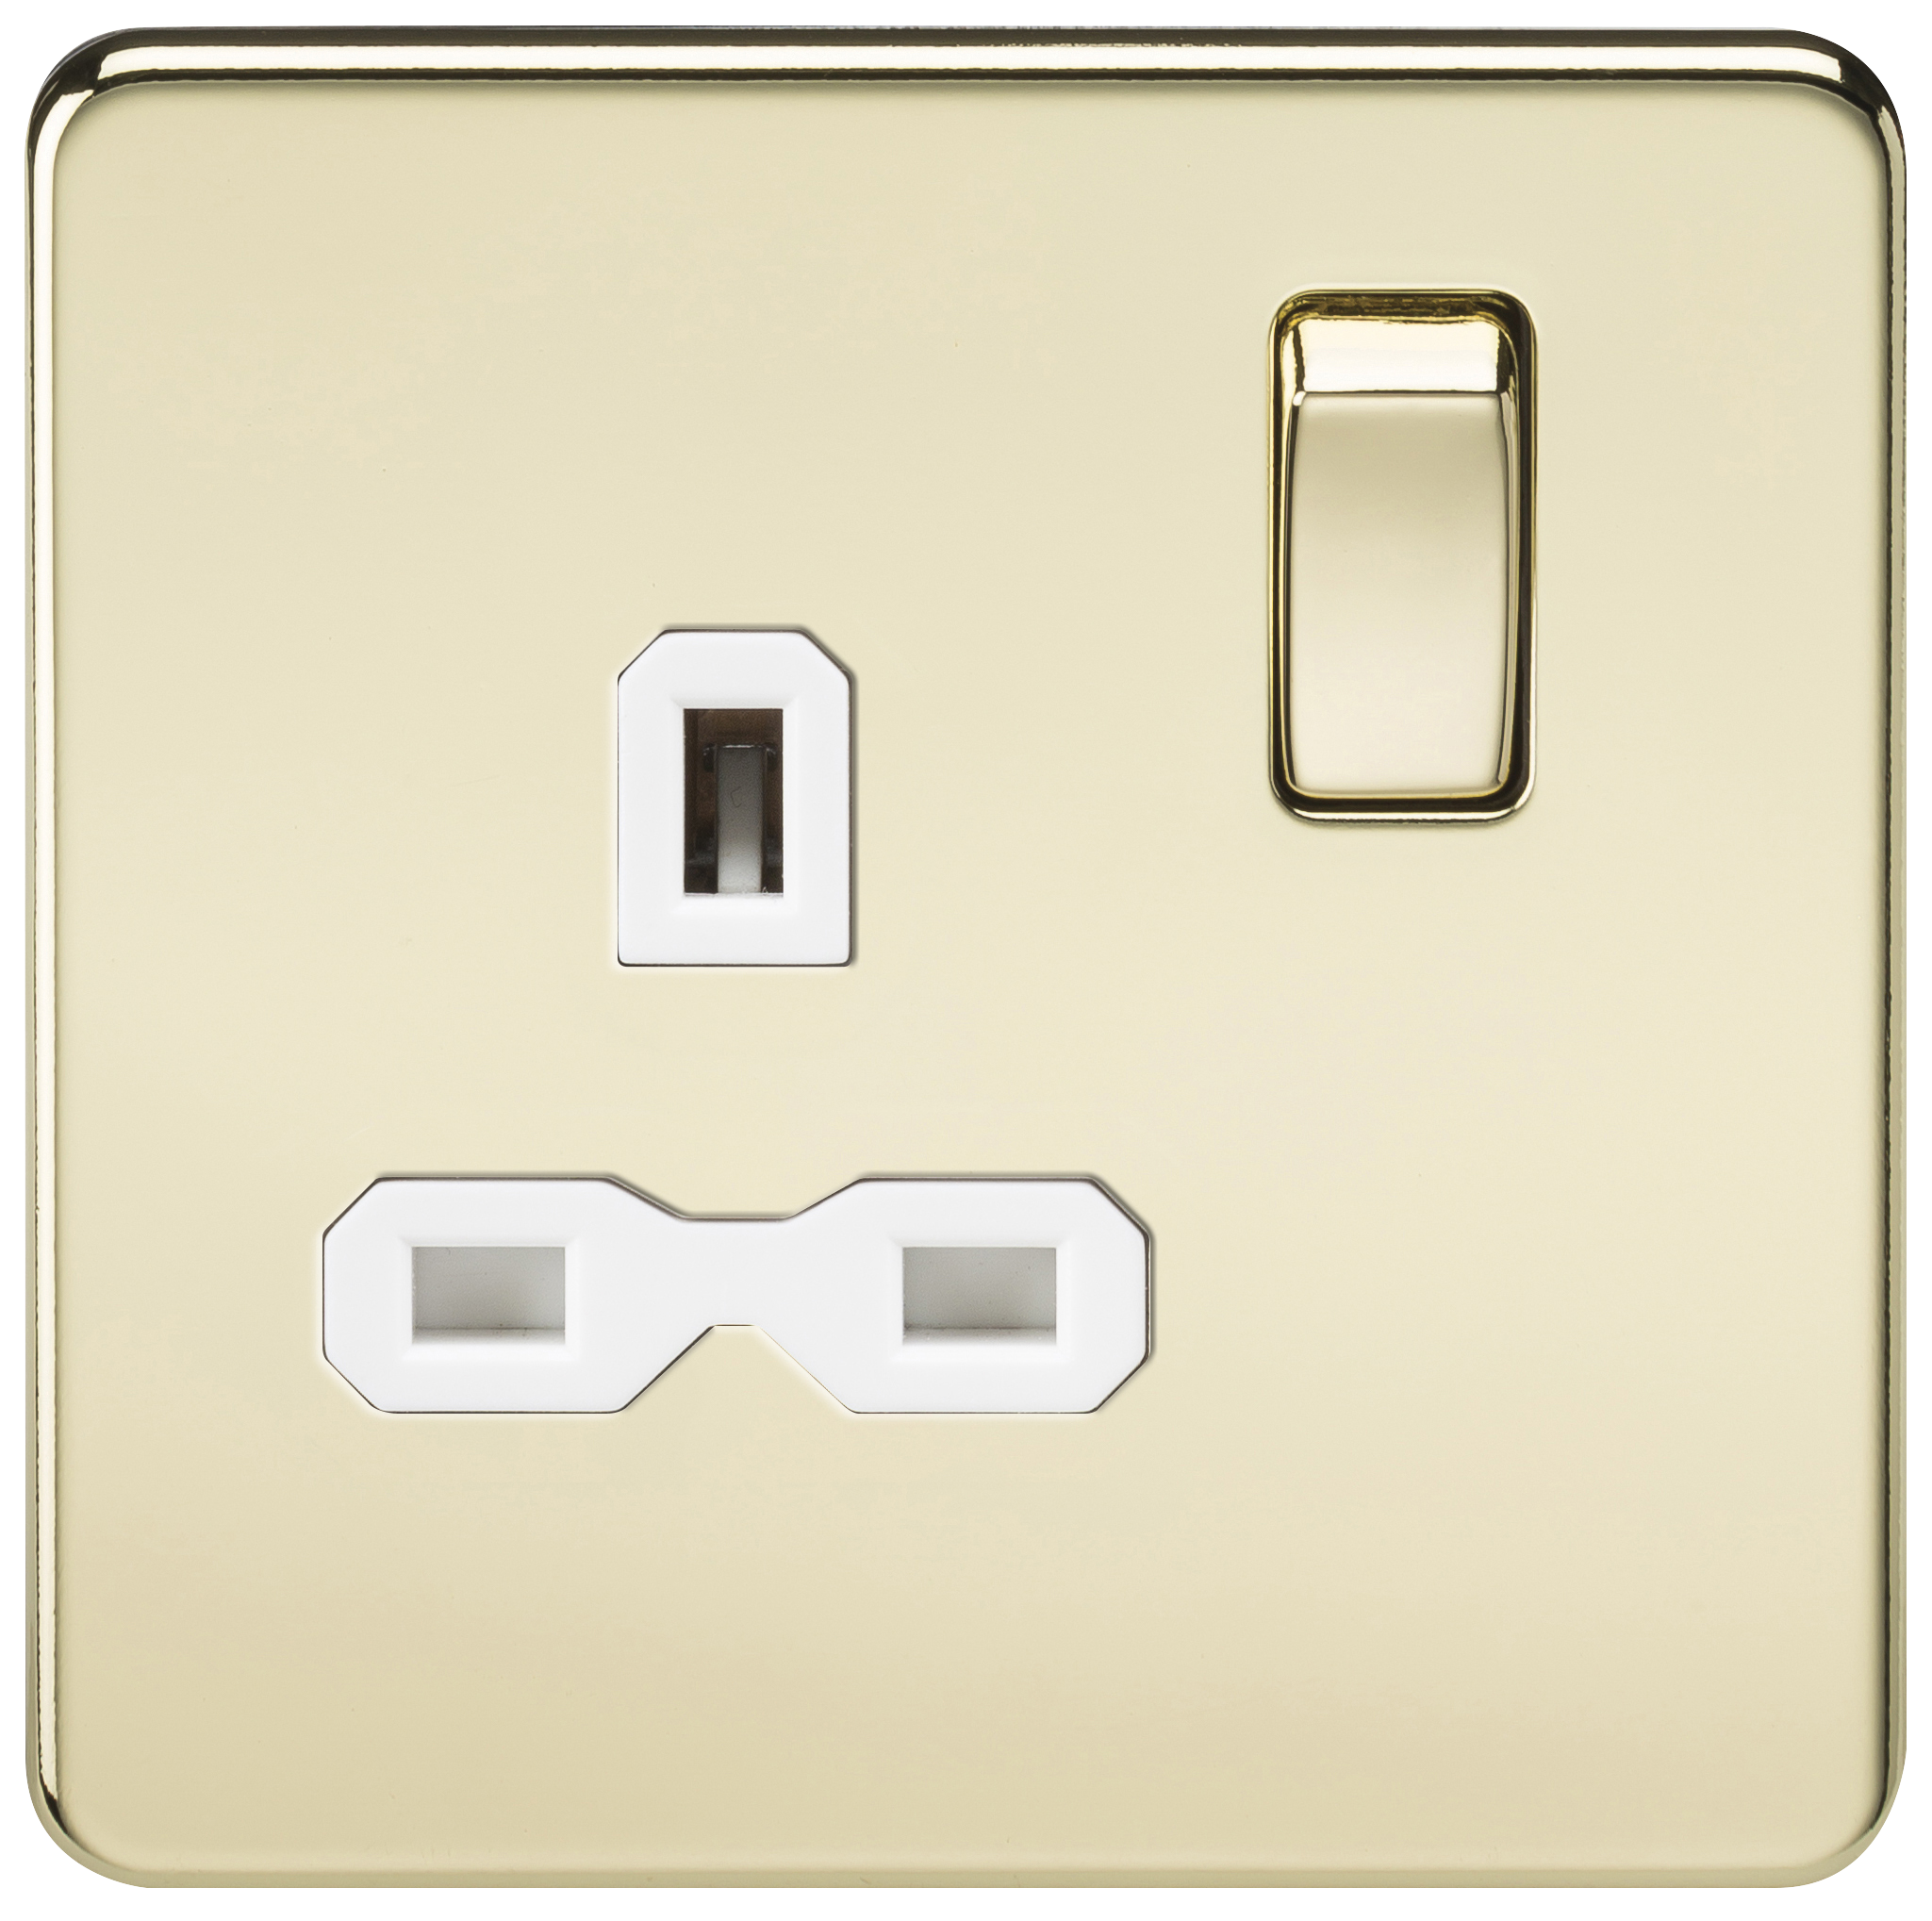 Screwless 13A 1G DP Switched Socket - Polished Brass With White Insert - SFR7000PBW 